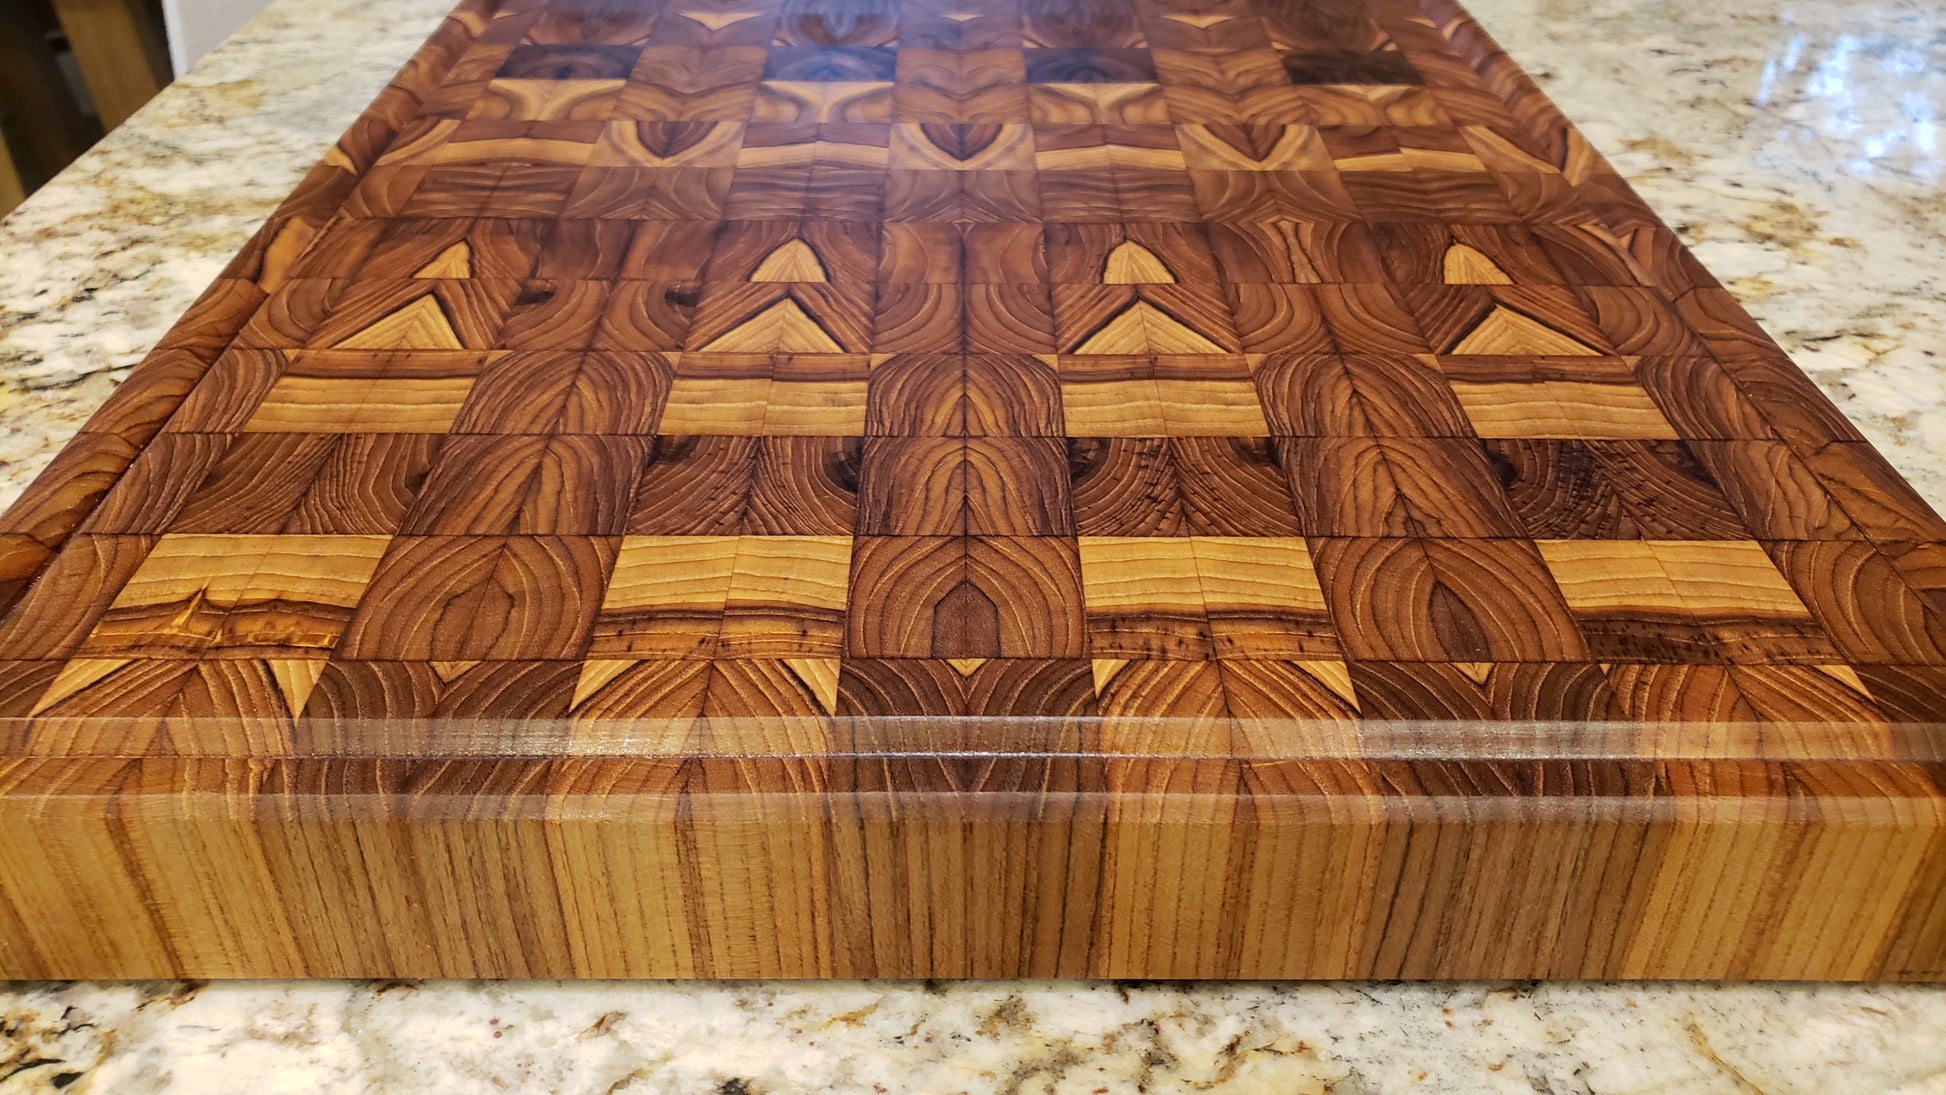 meistar Large End Grain Teak Wood Cutting Board for Kitchen, Brisket and  BBQ with S. Steel Tray and Juice Groove 